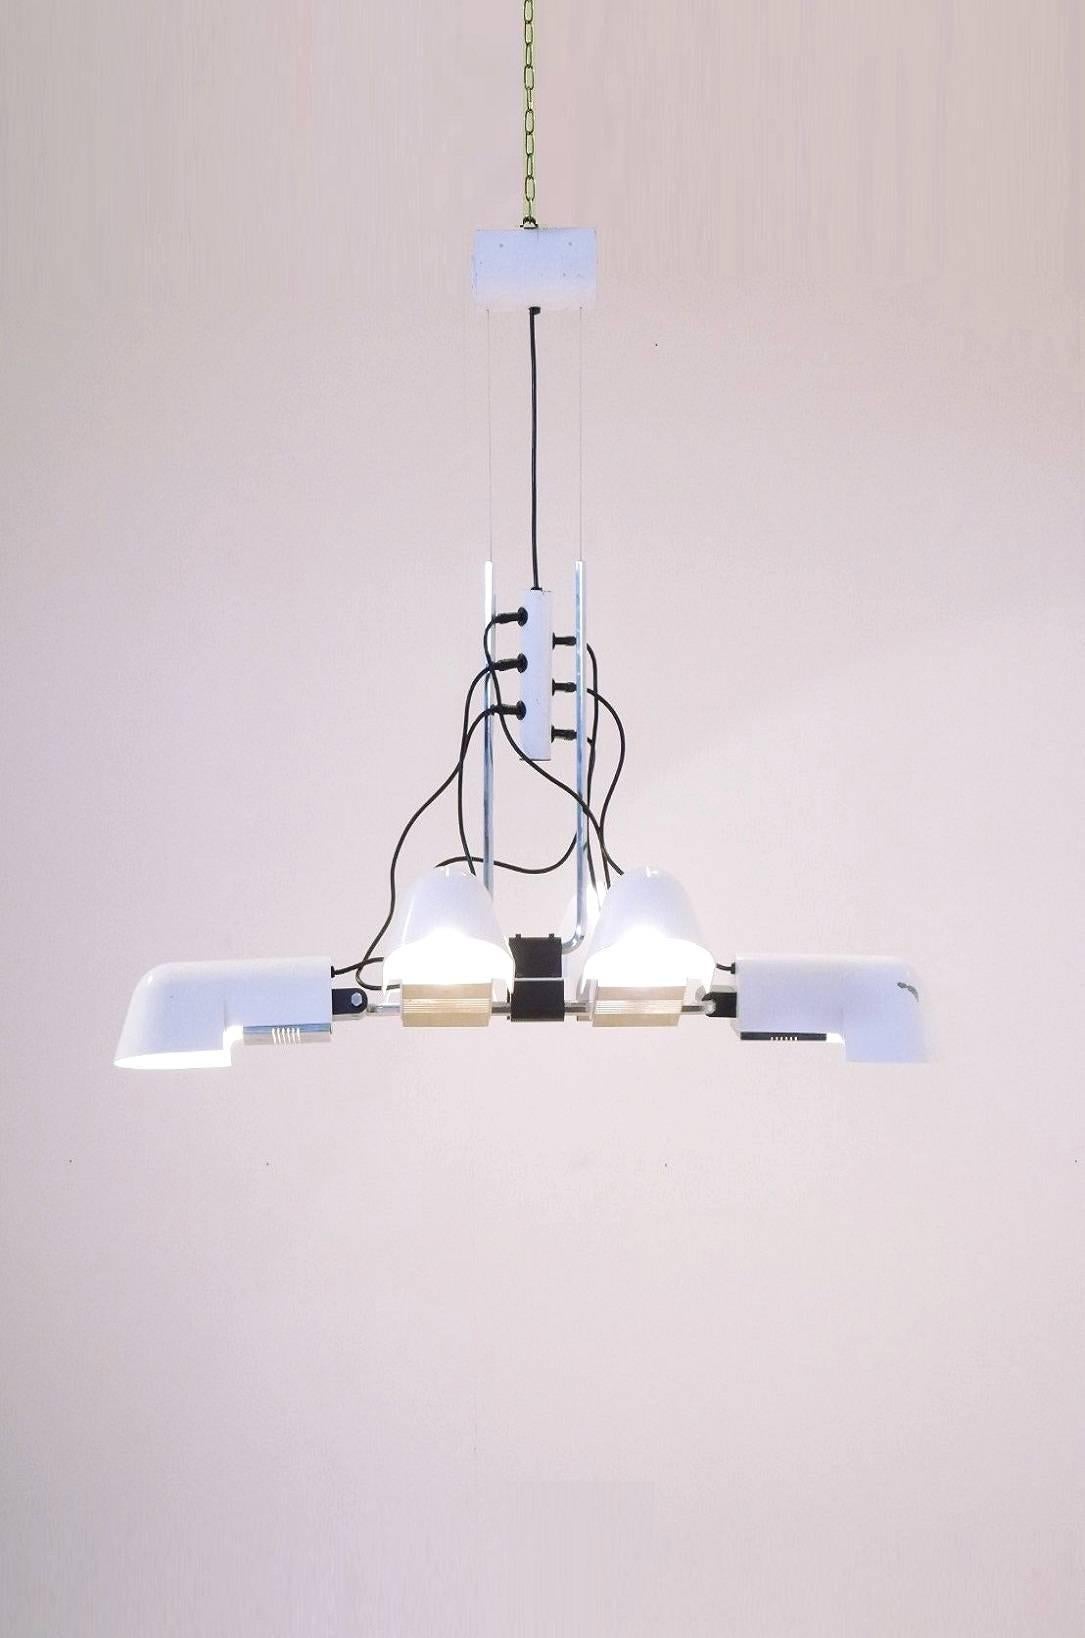 1970s large chandelier, model Pala, was designed by Danilo and Corrado Aroldi and manufactured by Luci. It is made from white lacquered cast aluminum, chromed metal, and black plastic. This lamp is composed of six shades that can be taken apart and